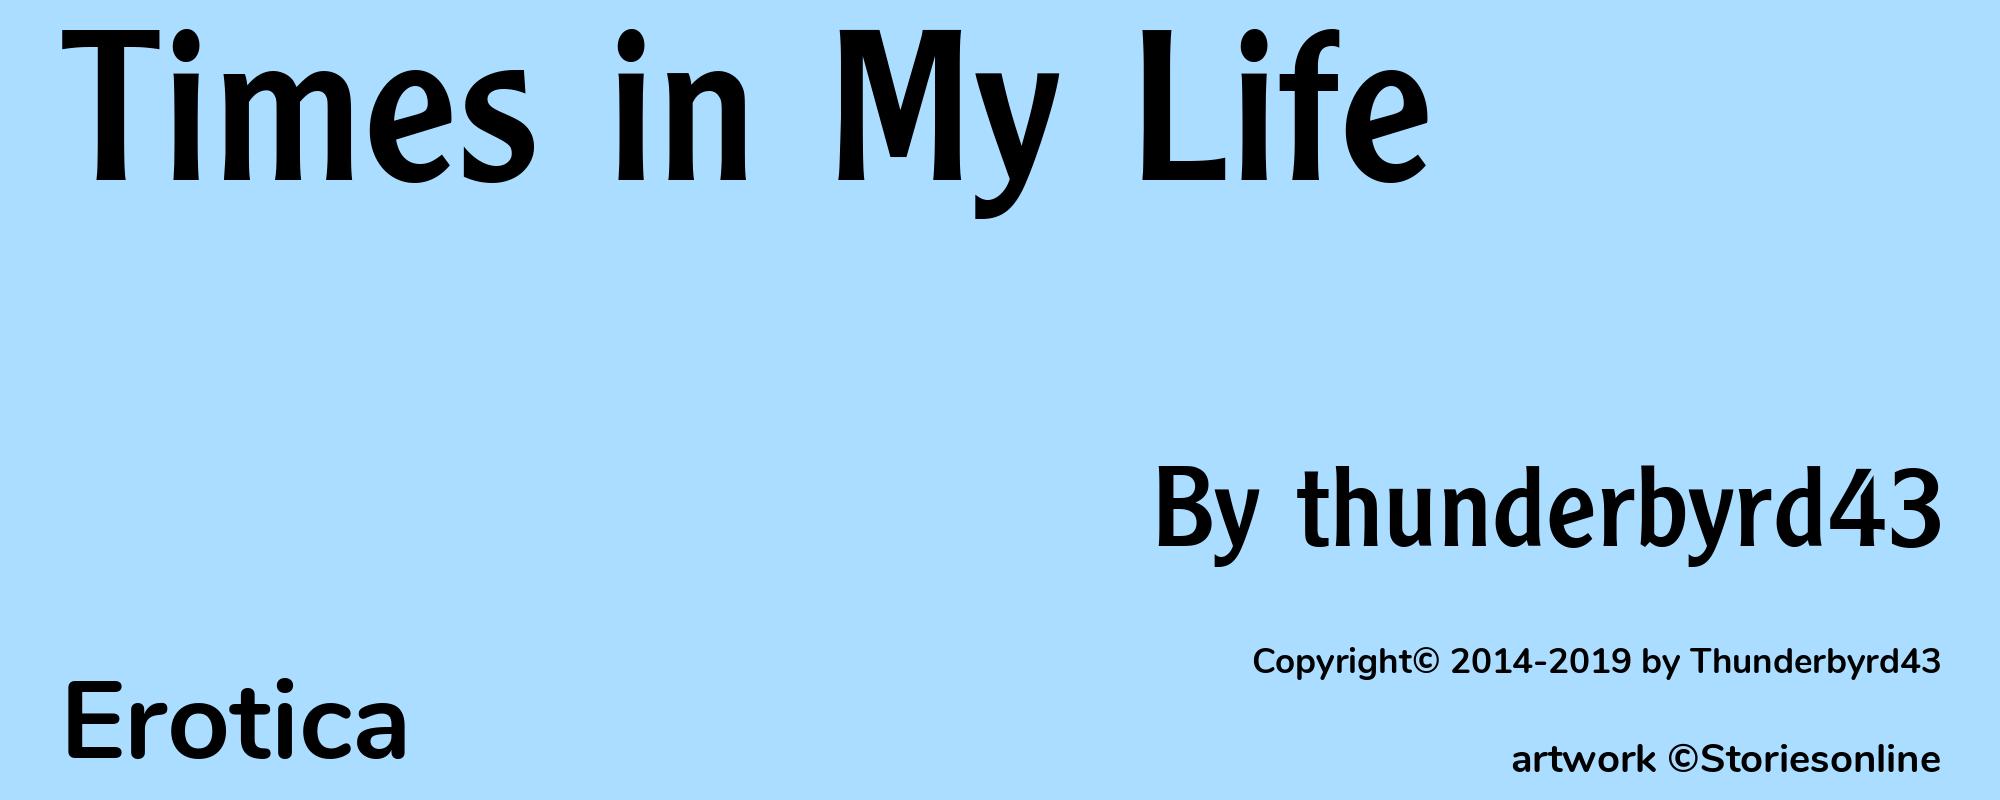 Times in My Life - Cover